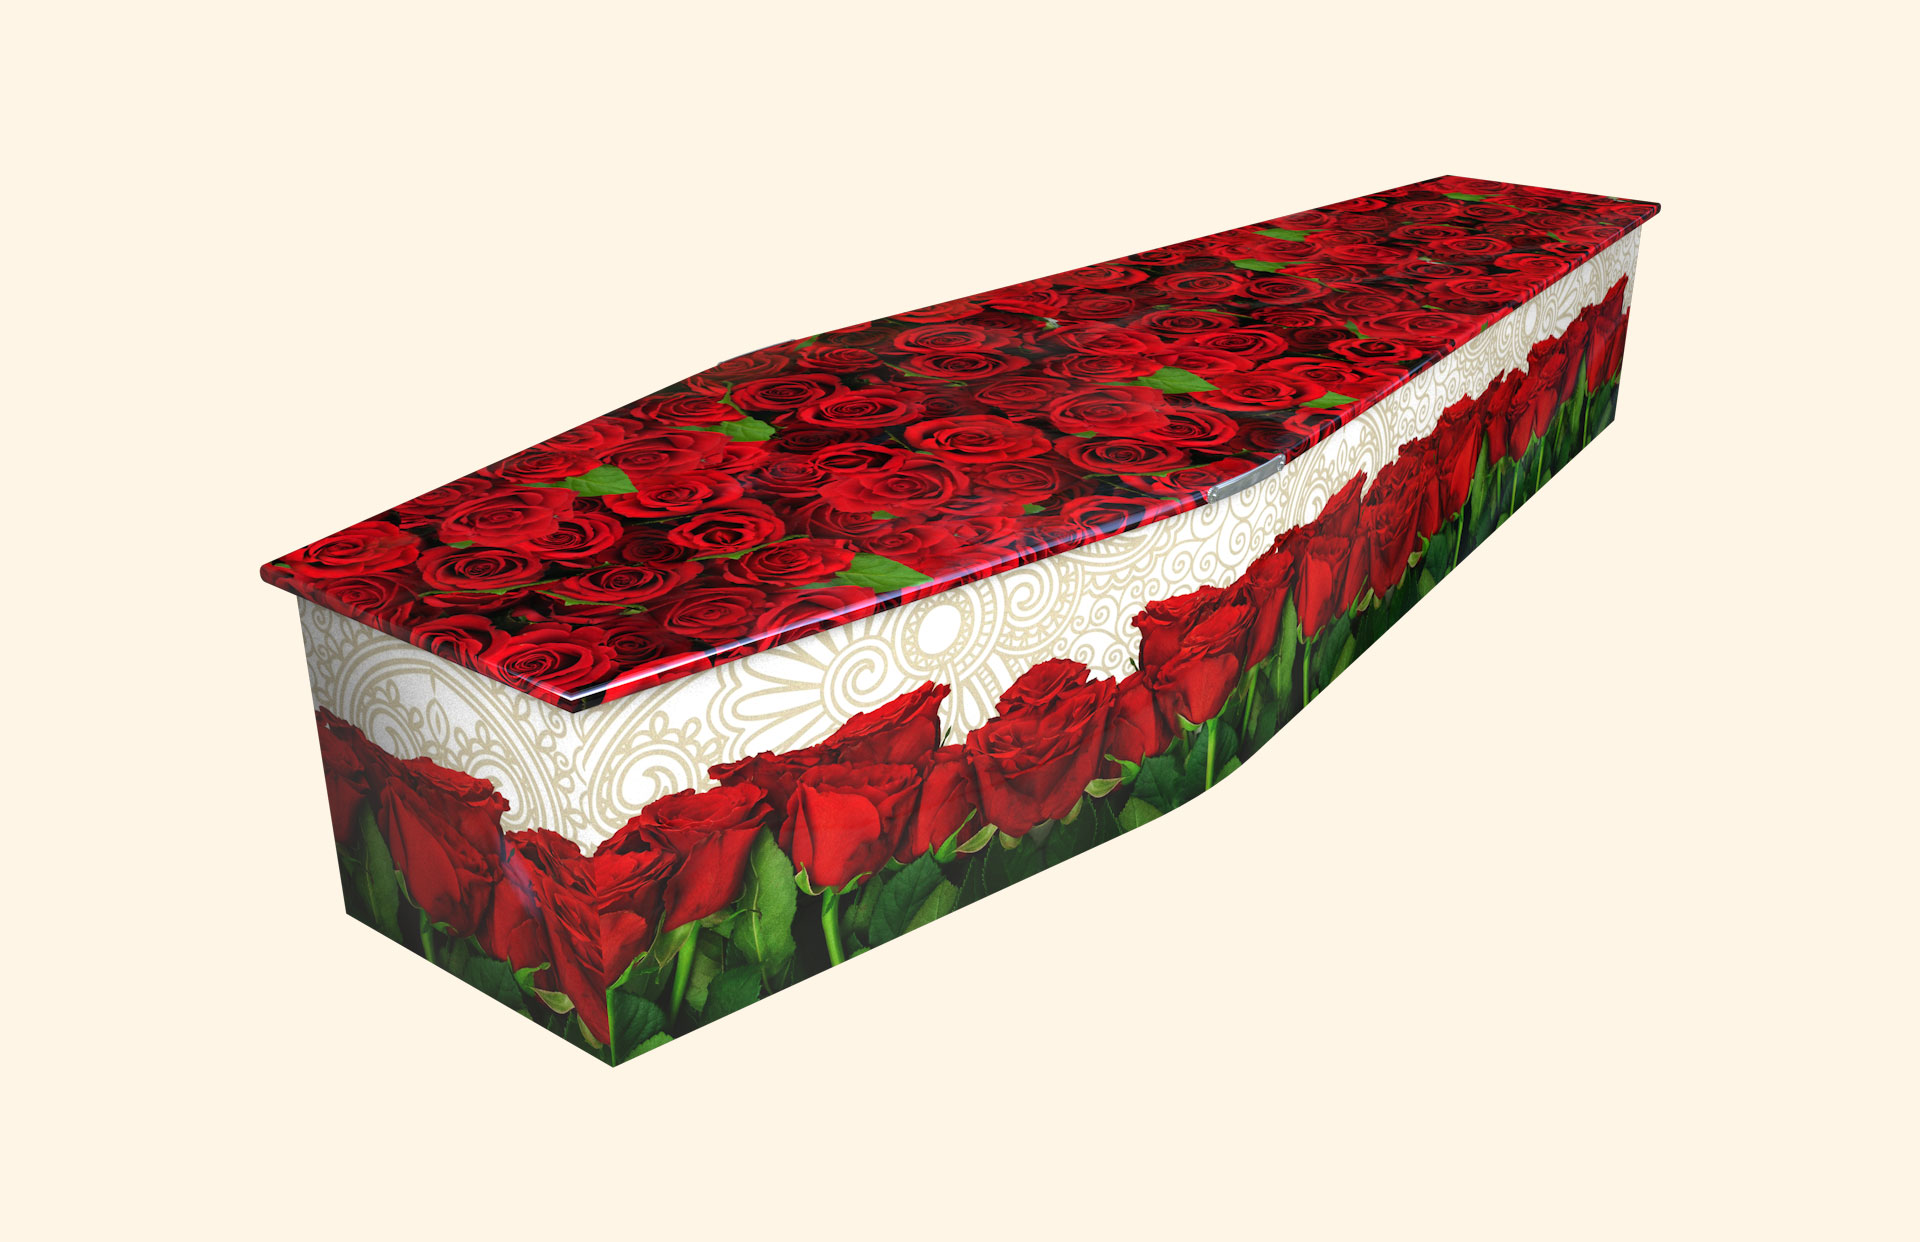 My Rosemary design on a traditional coffin